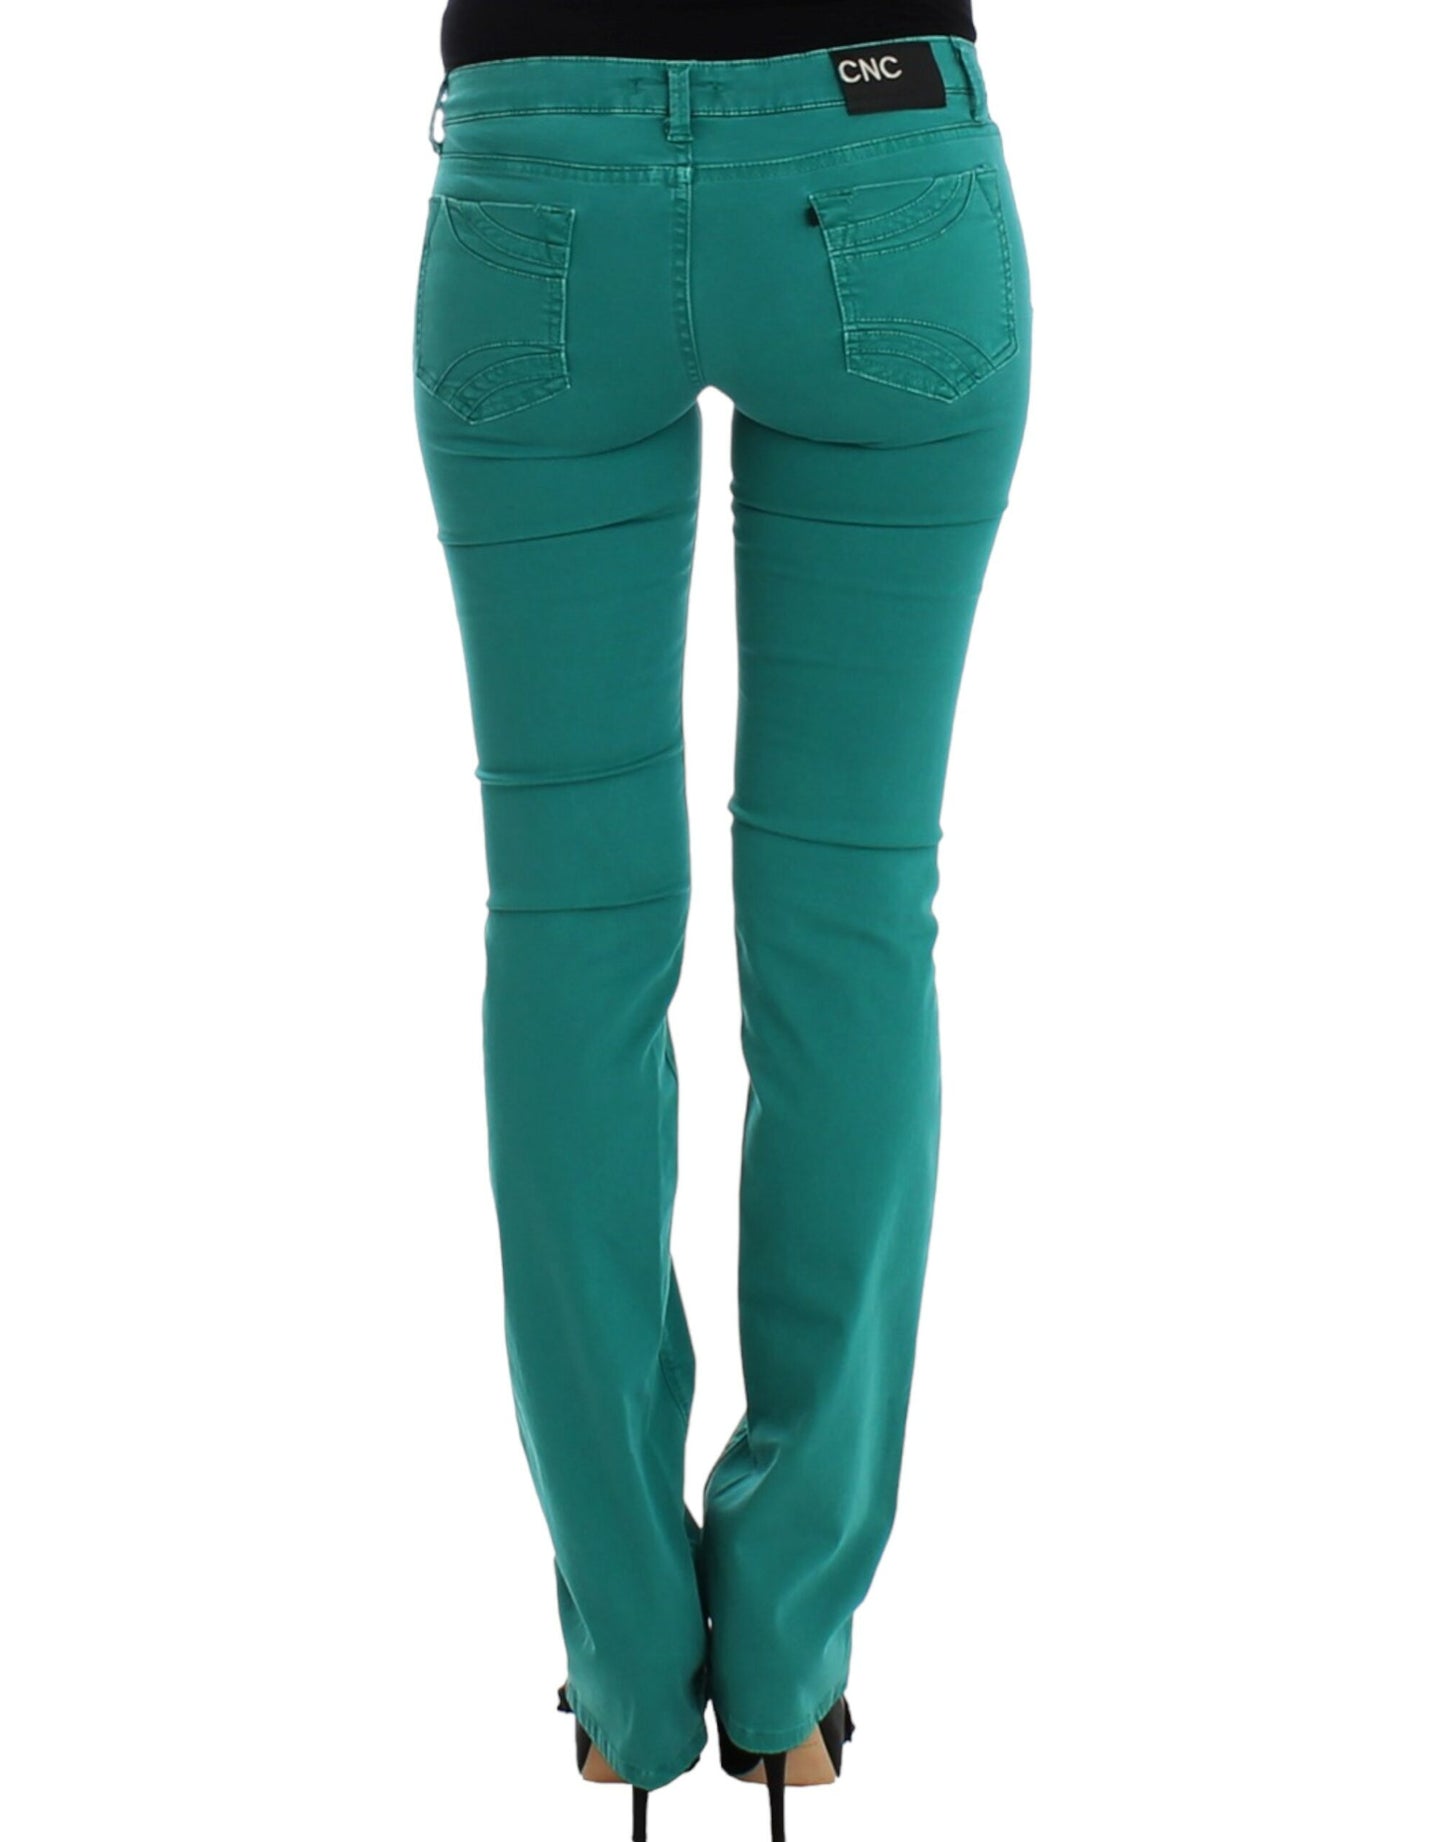 Chic Green Straight Leg Jeans for Sophisticated Style